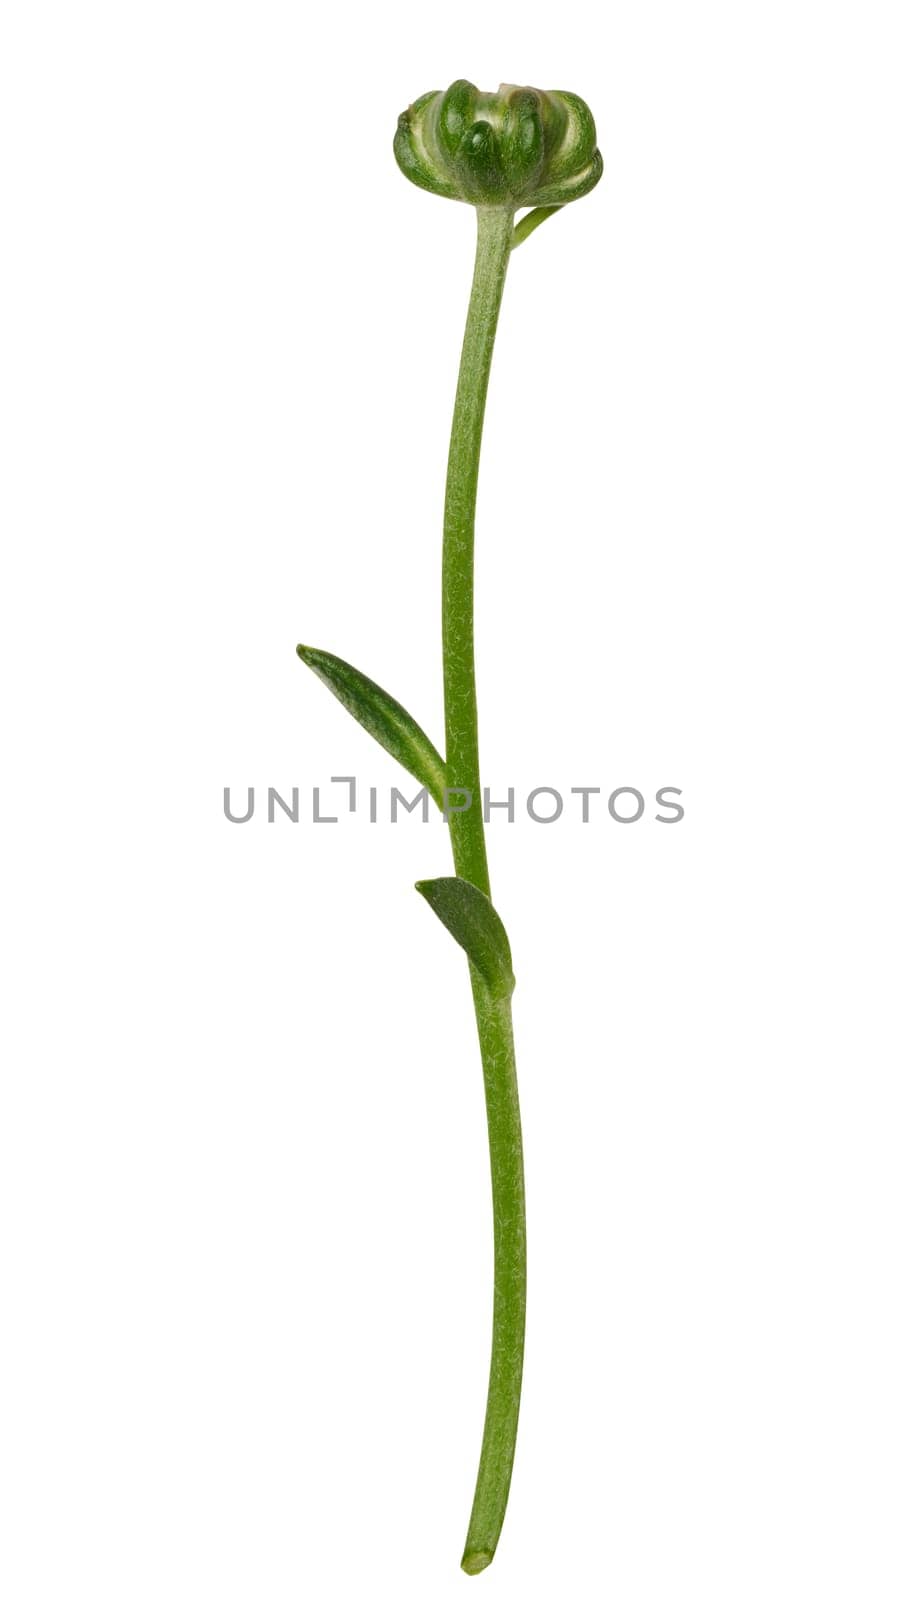 Green stem of chrysanthemum with white unblown bud on isolated background by ndanko